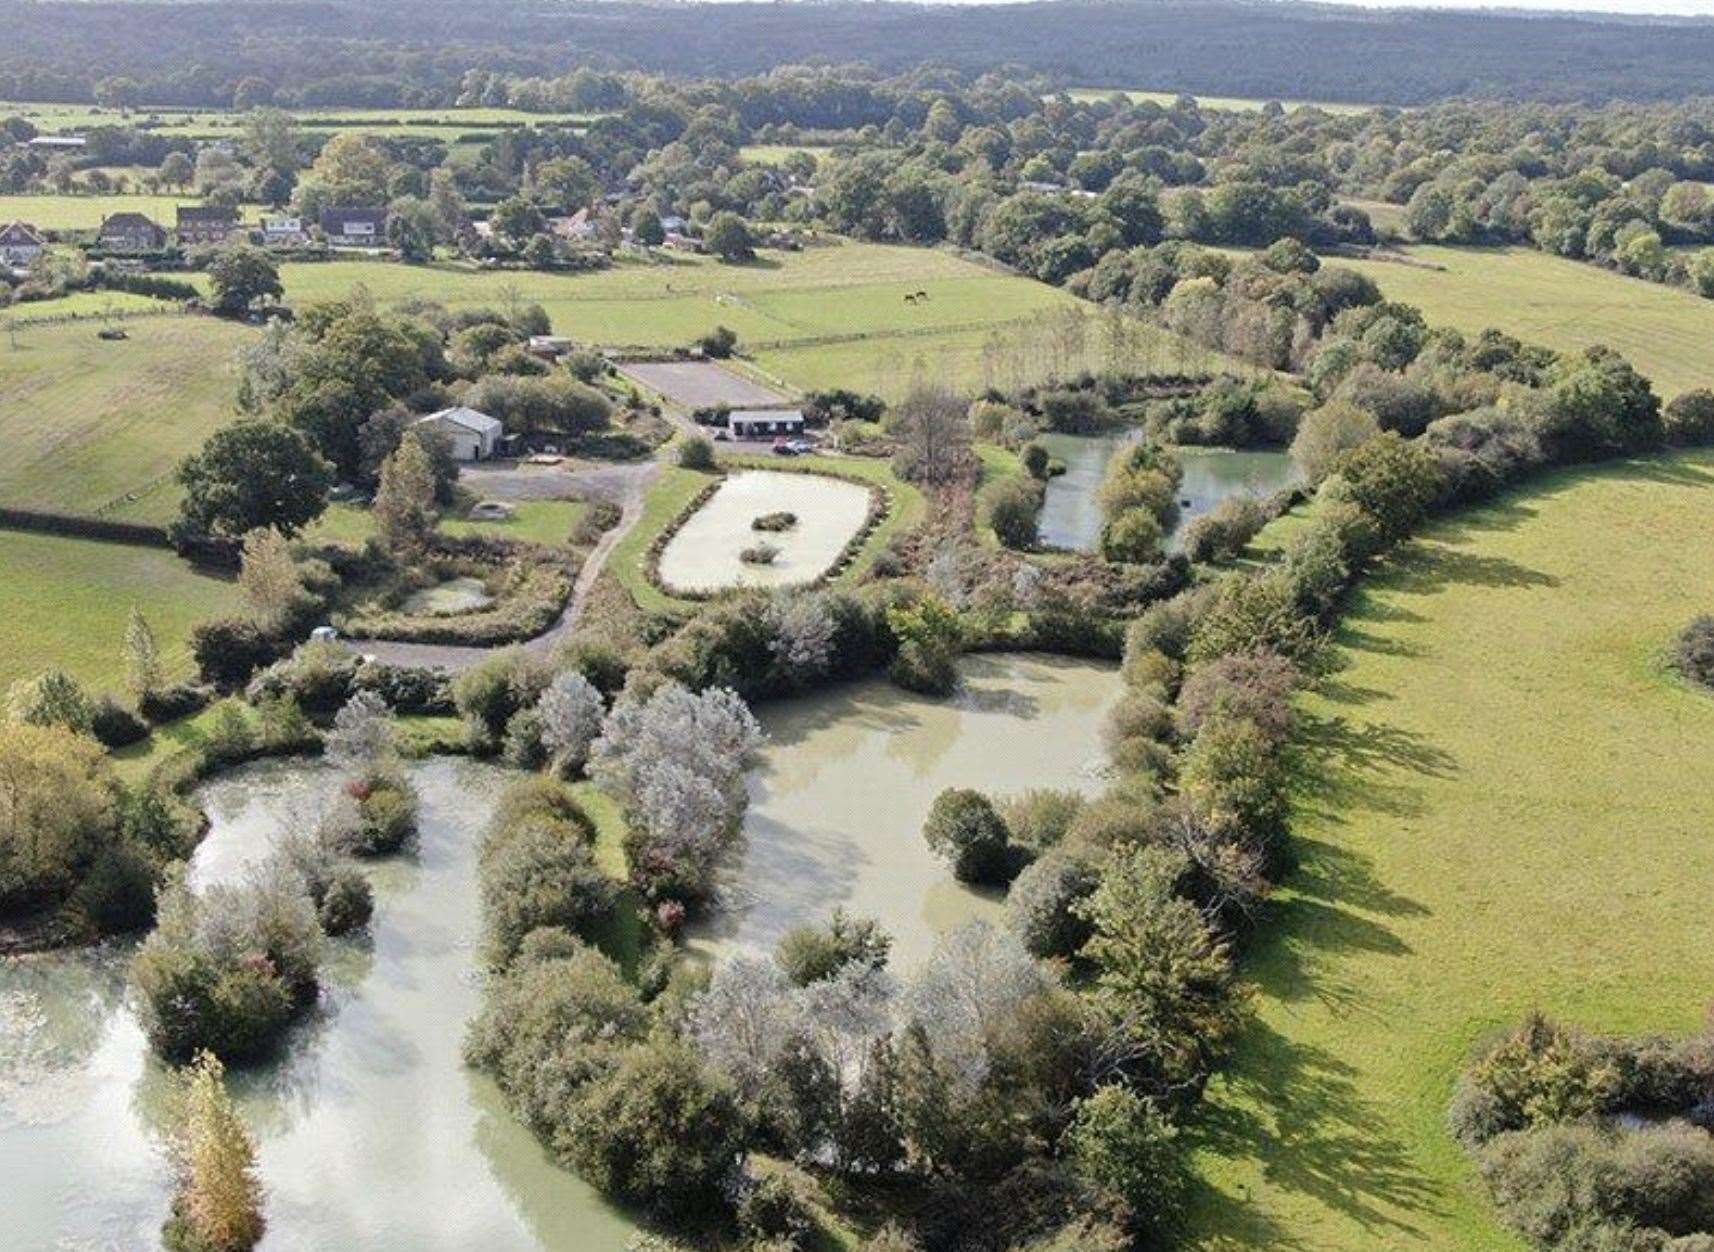 The fishery covers more than 11 acres. Picture: Savills